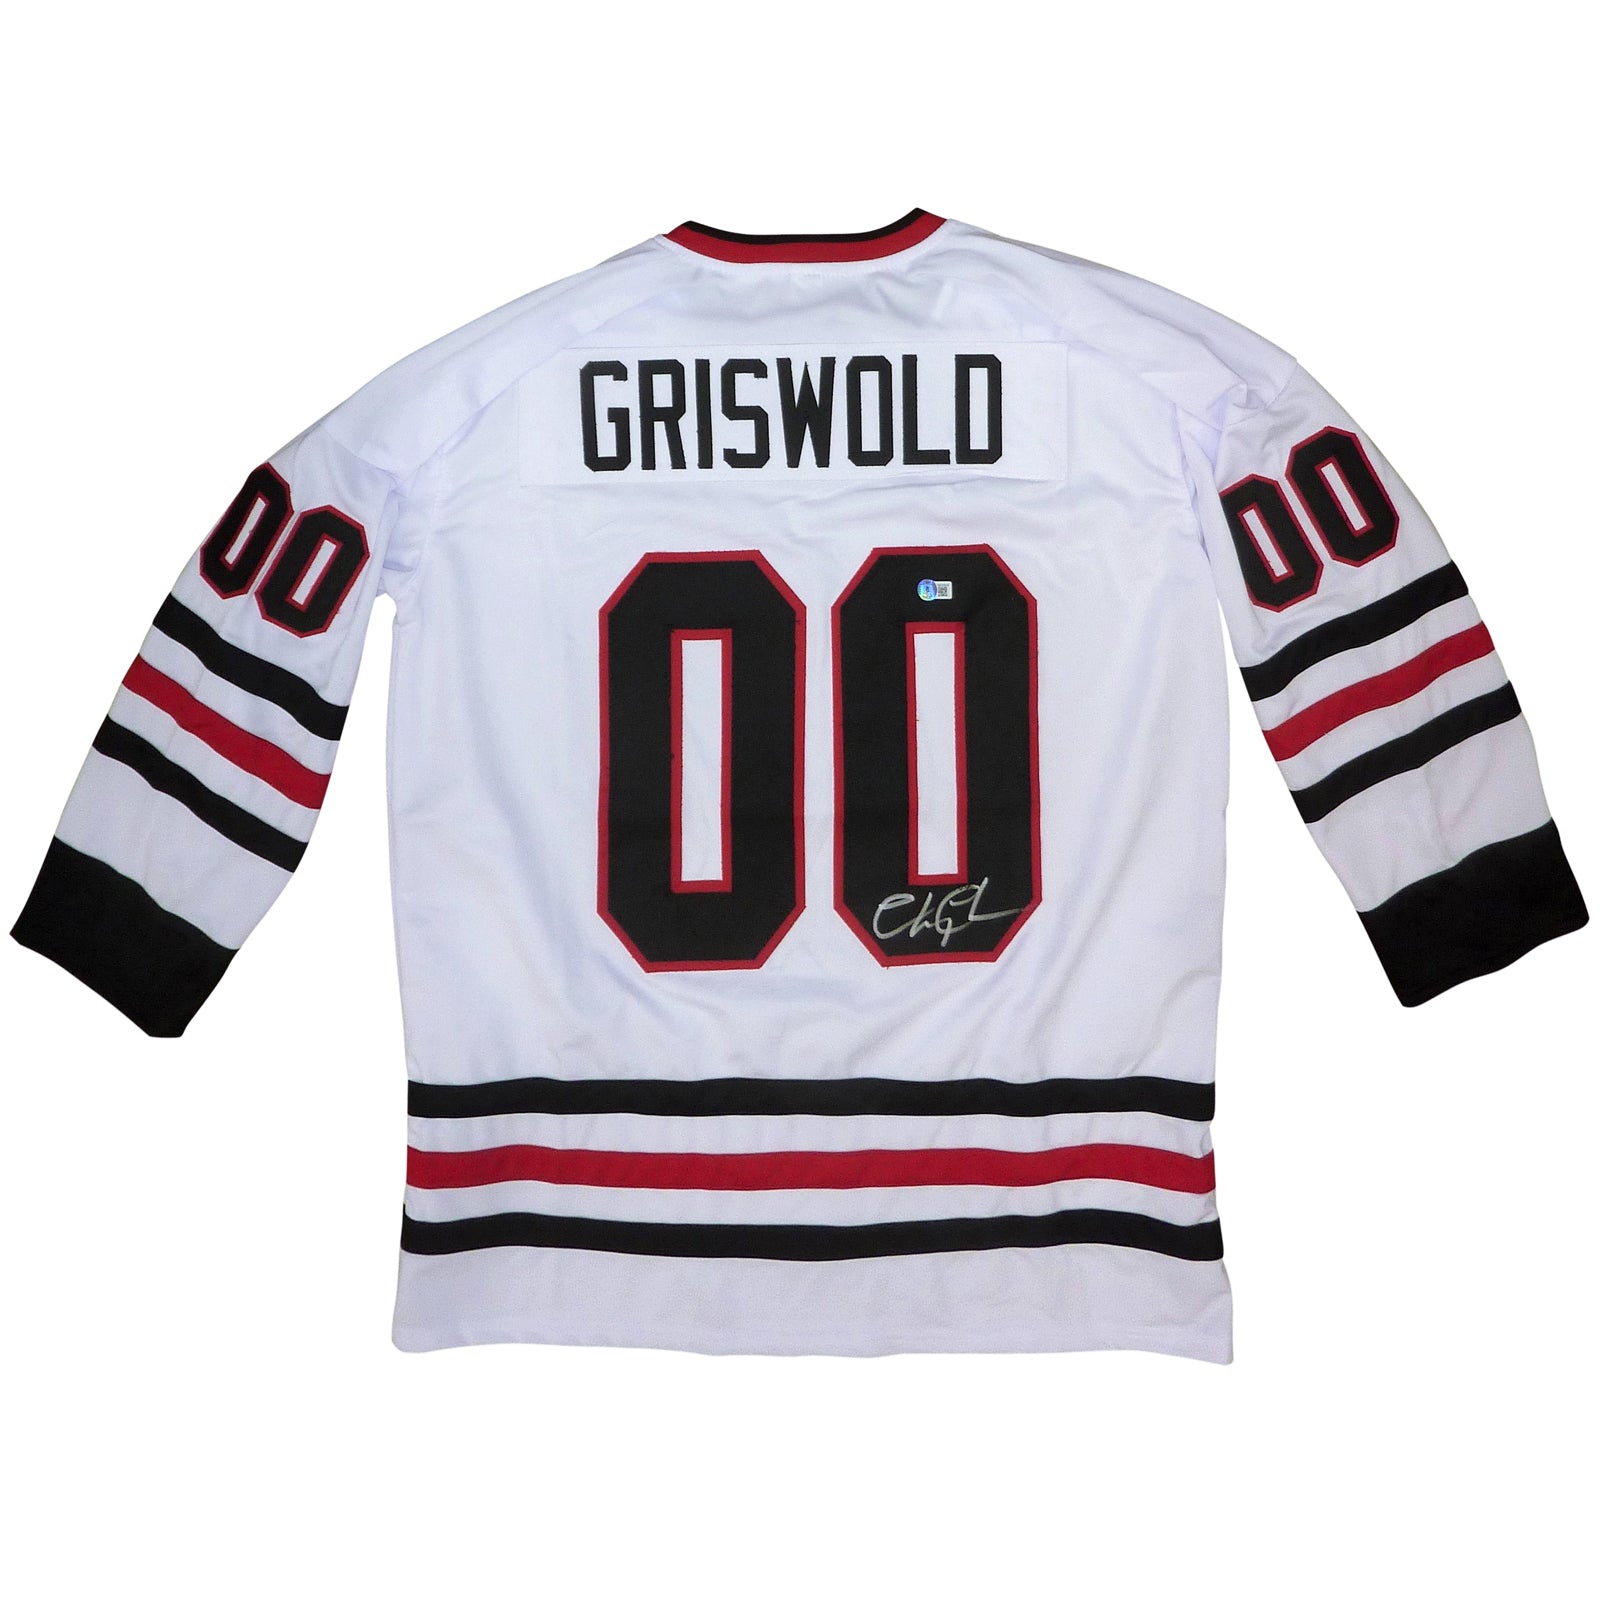 griswold chiefs jersey